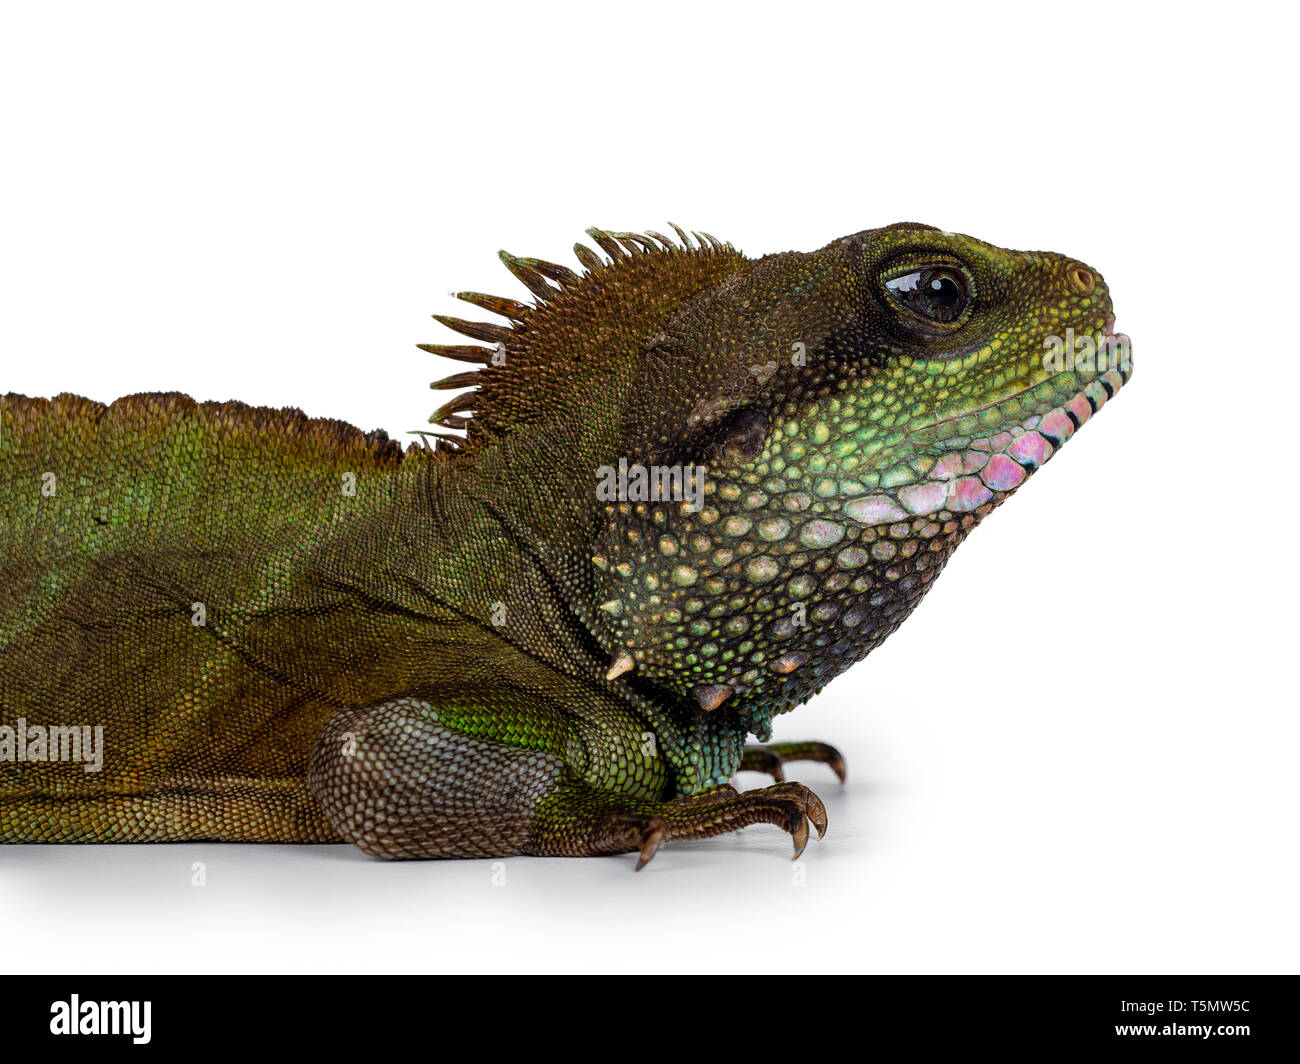 Head shot of amazing colorful adult Asian Water Dragon sitting / standing side ways on flat surface. Showing eyes and full body. Isolated on white bac Stock Photo